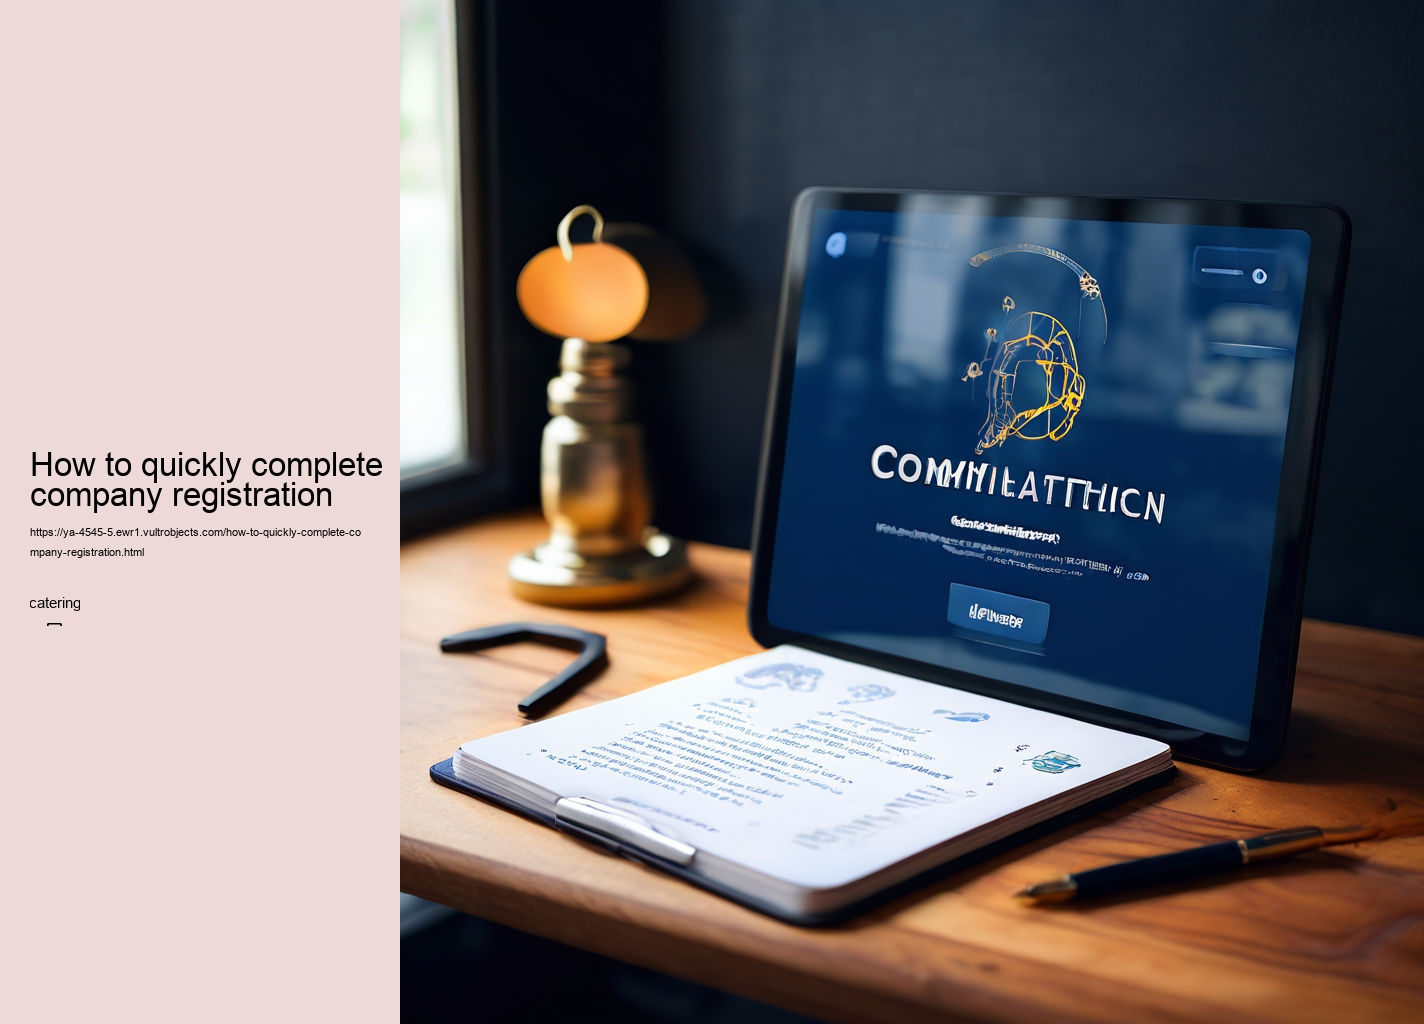 How to quickly complete company registration